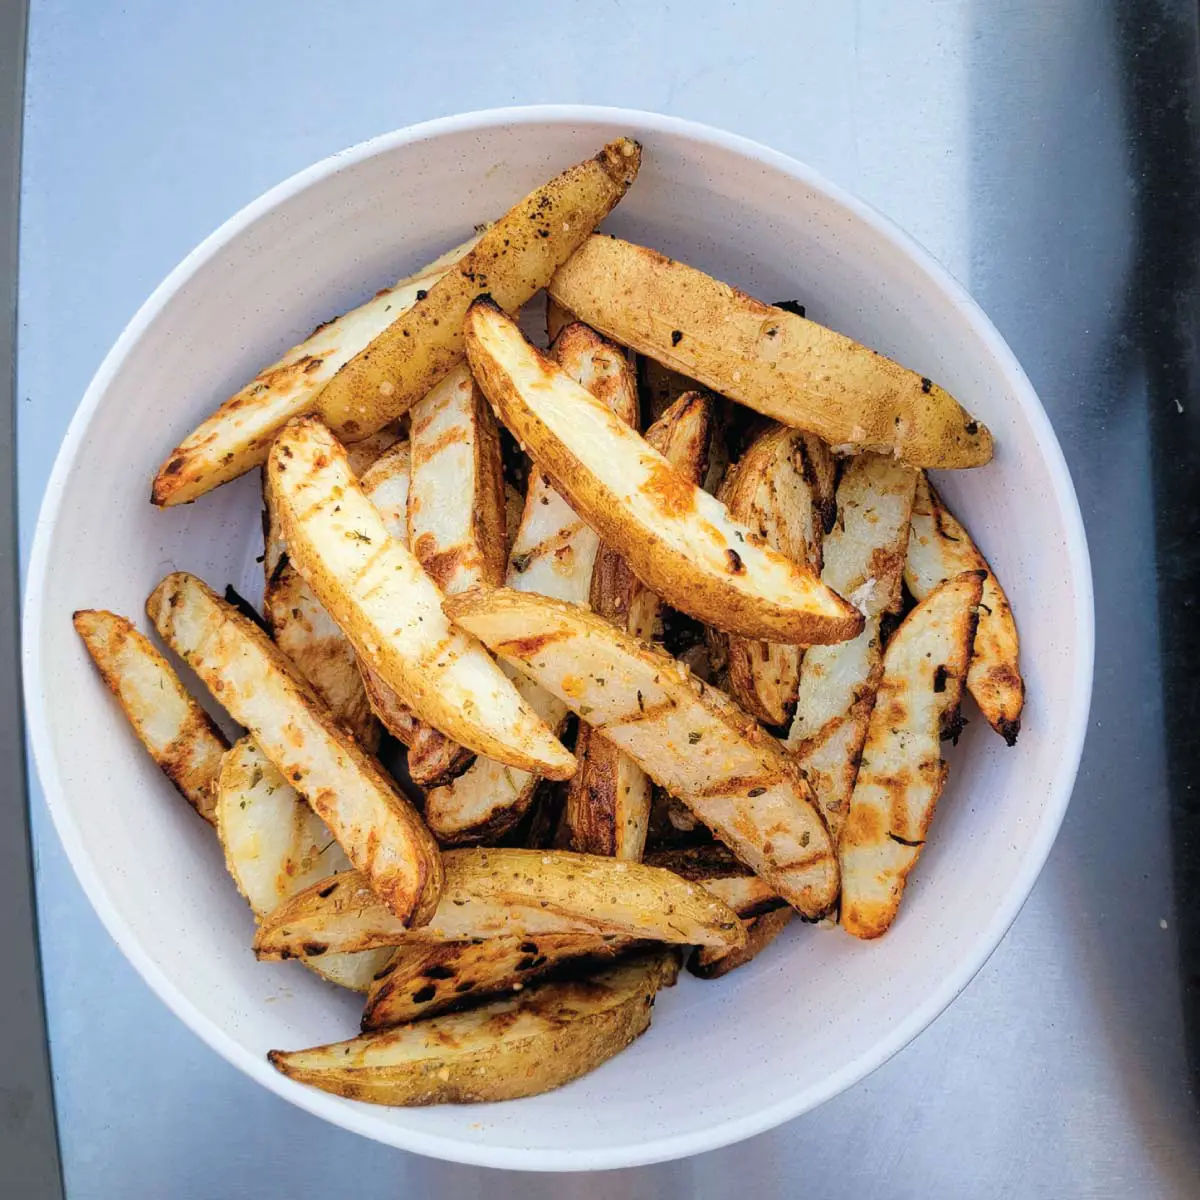 Potato wedges in a bowl after being grilled ready to serve.